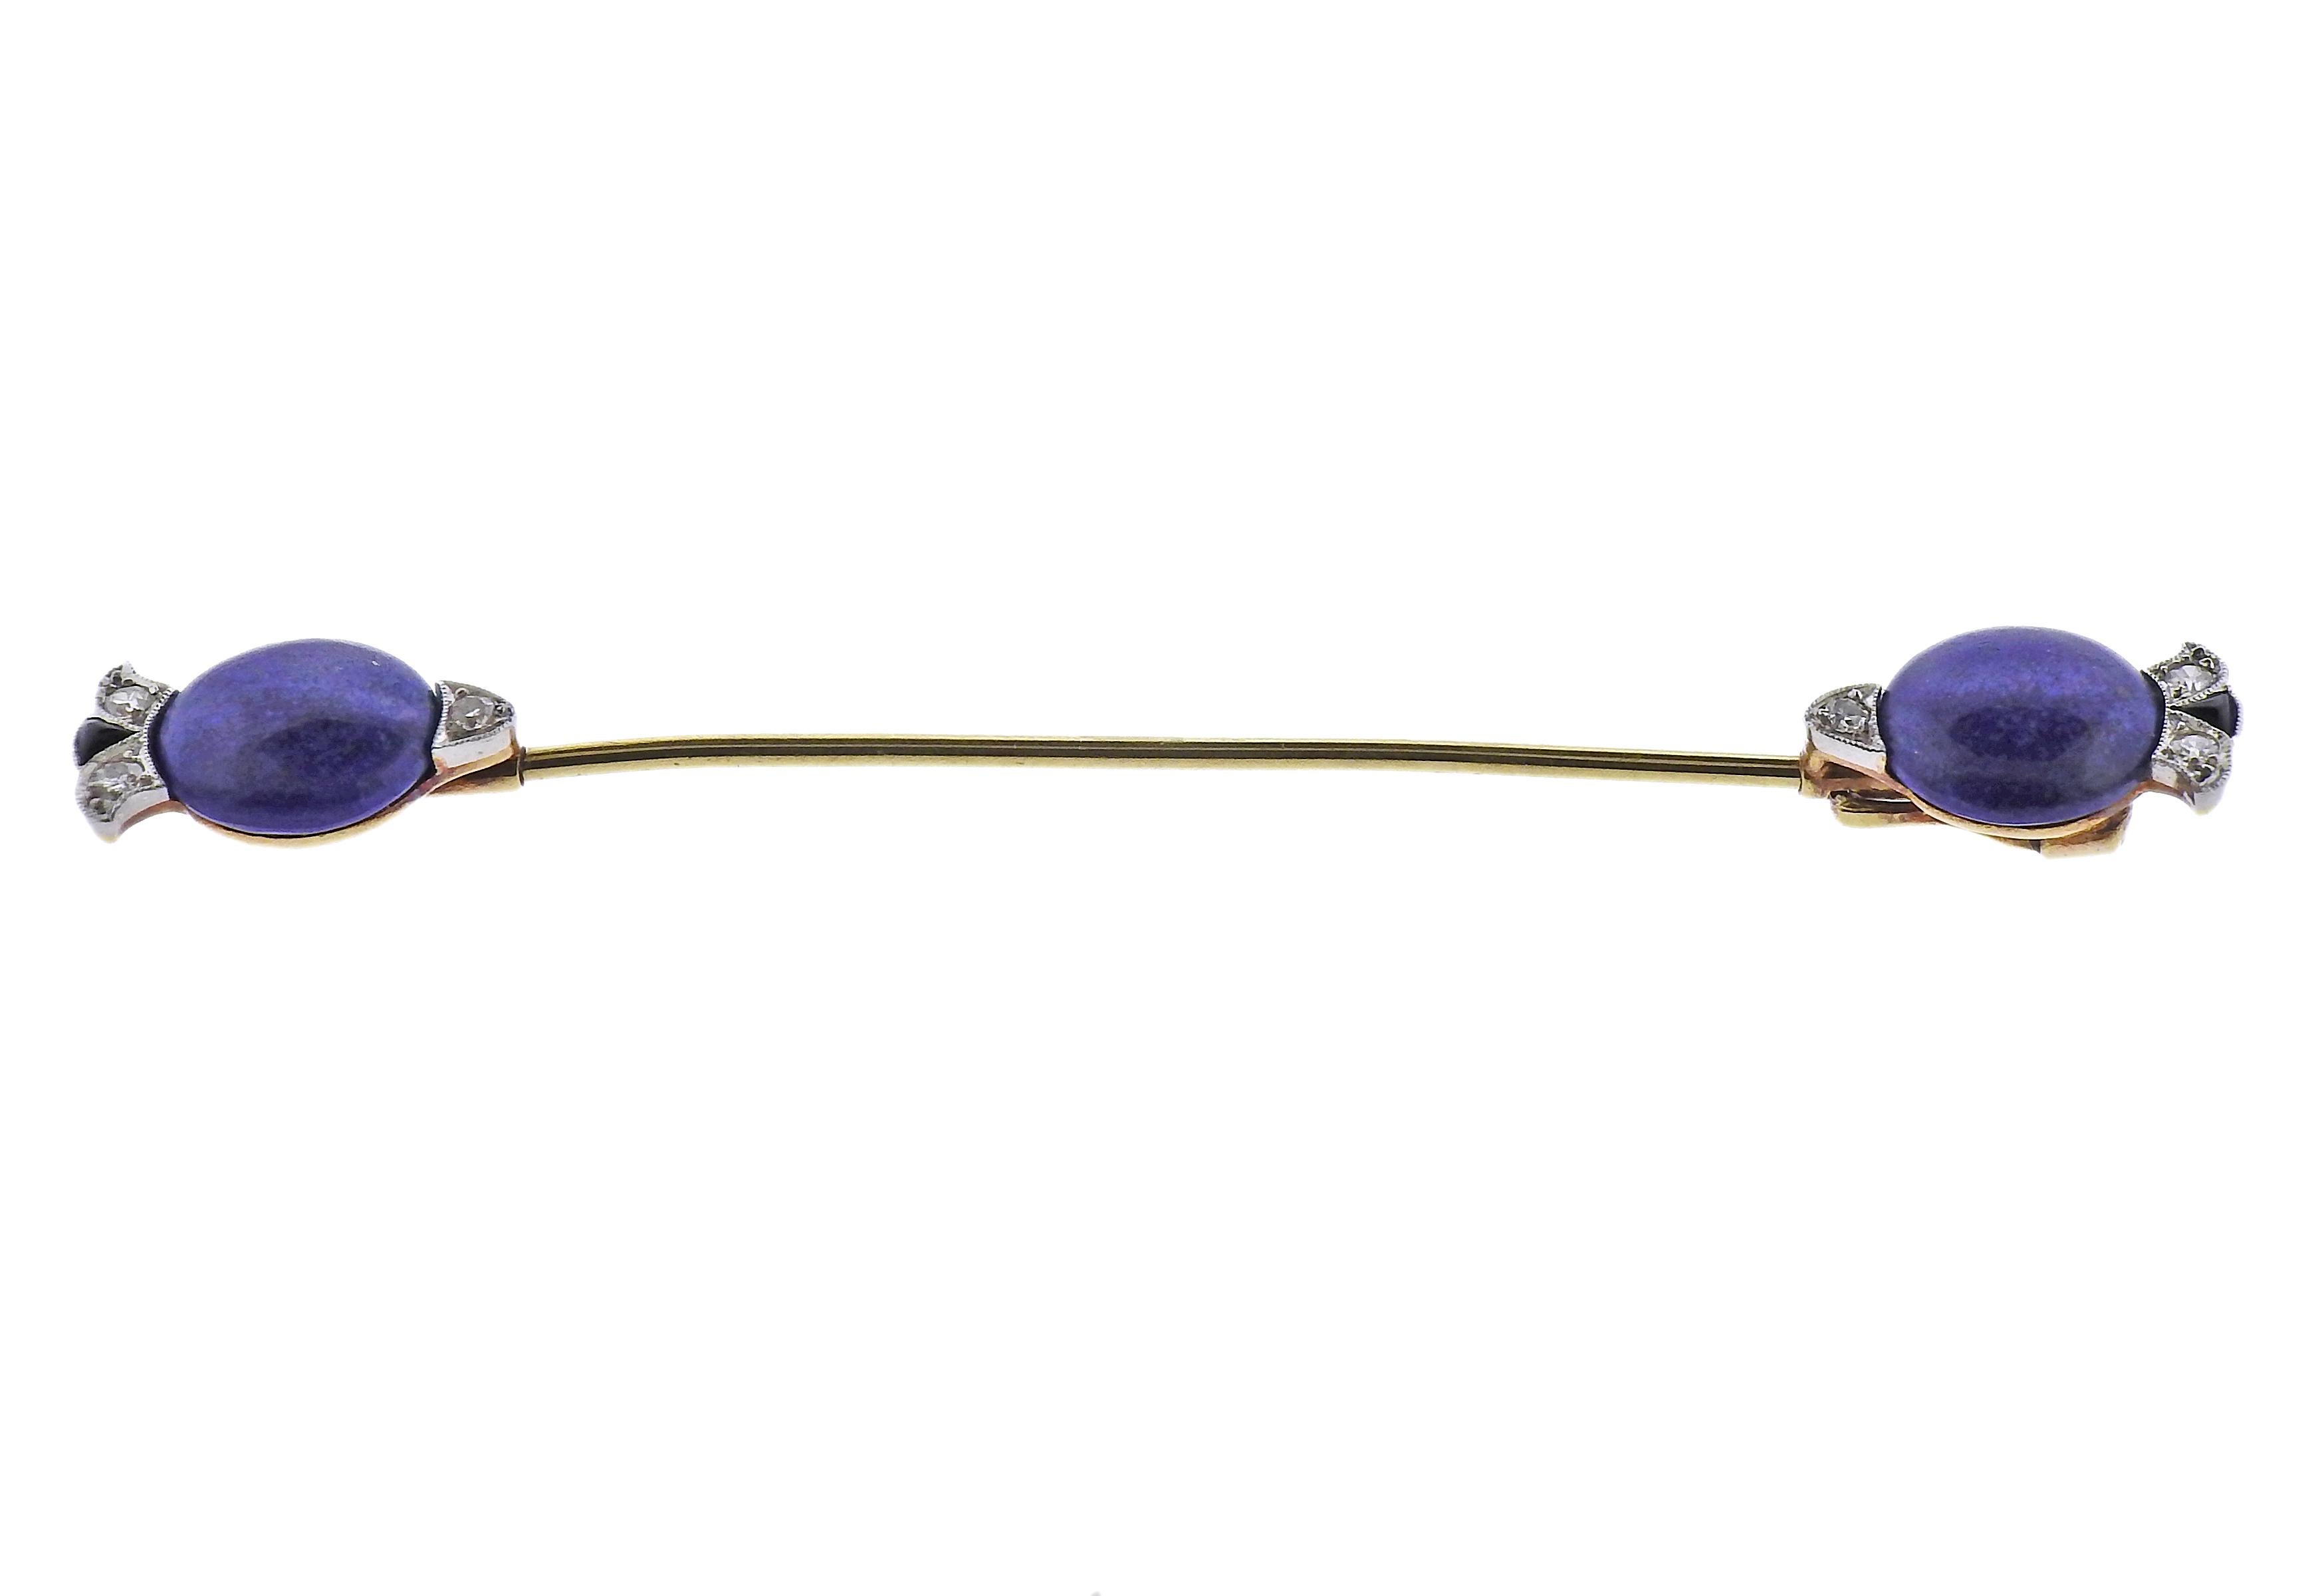 Art Deco Tiffany & Co 14k gold and platinum jabot pin, adorned with lapis, onyx and diamonds. Each top is 10mm in diameter, entire pin is 76mm long.  Marked Tiffany & Co. Weight - 4.6 grams.